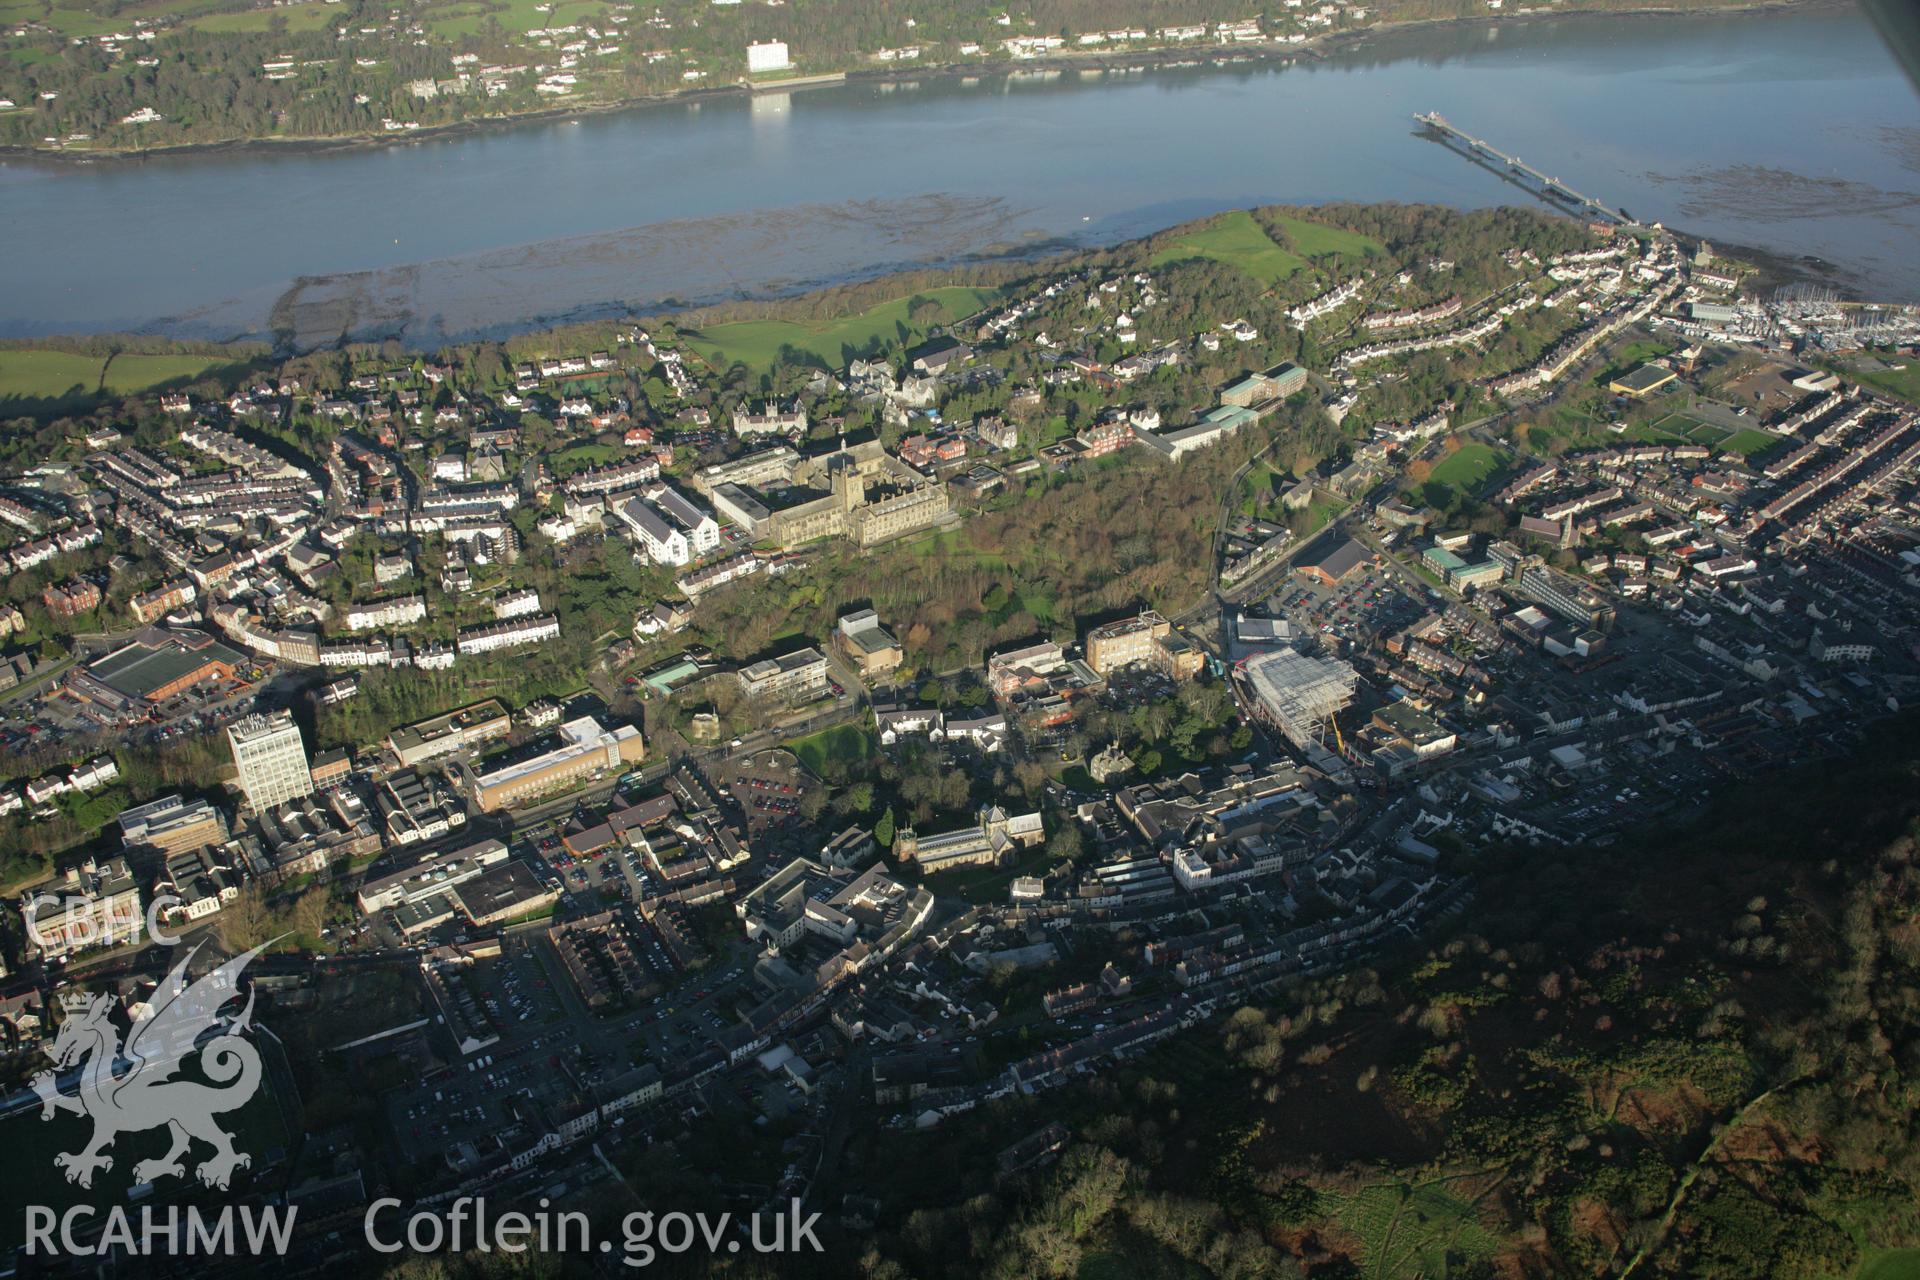 RCAHMW colour oblique aerial photograph of Bangor. Taken on 25 January 2007 by Toby Driver